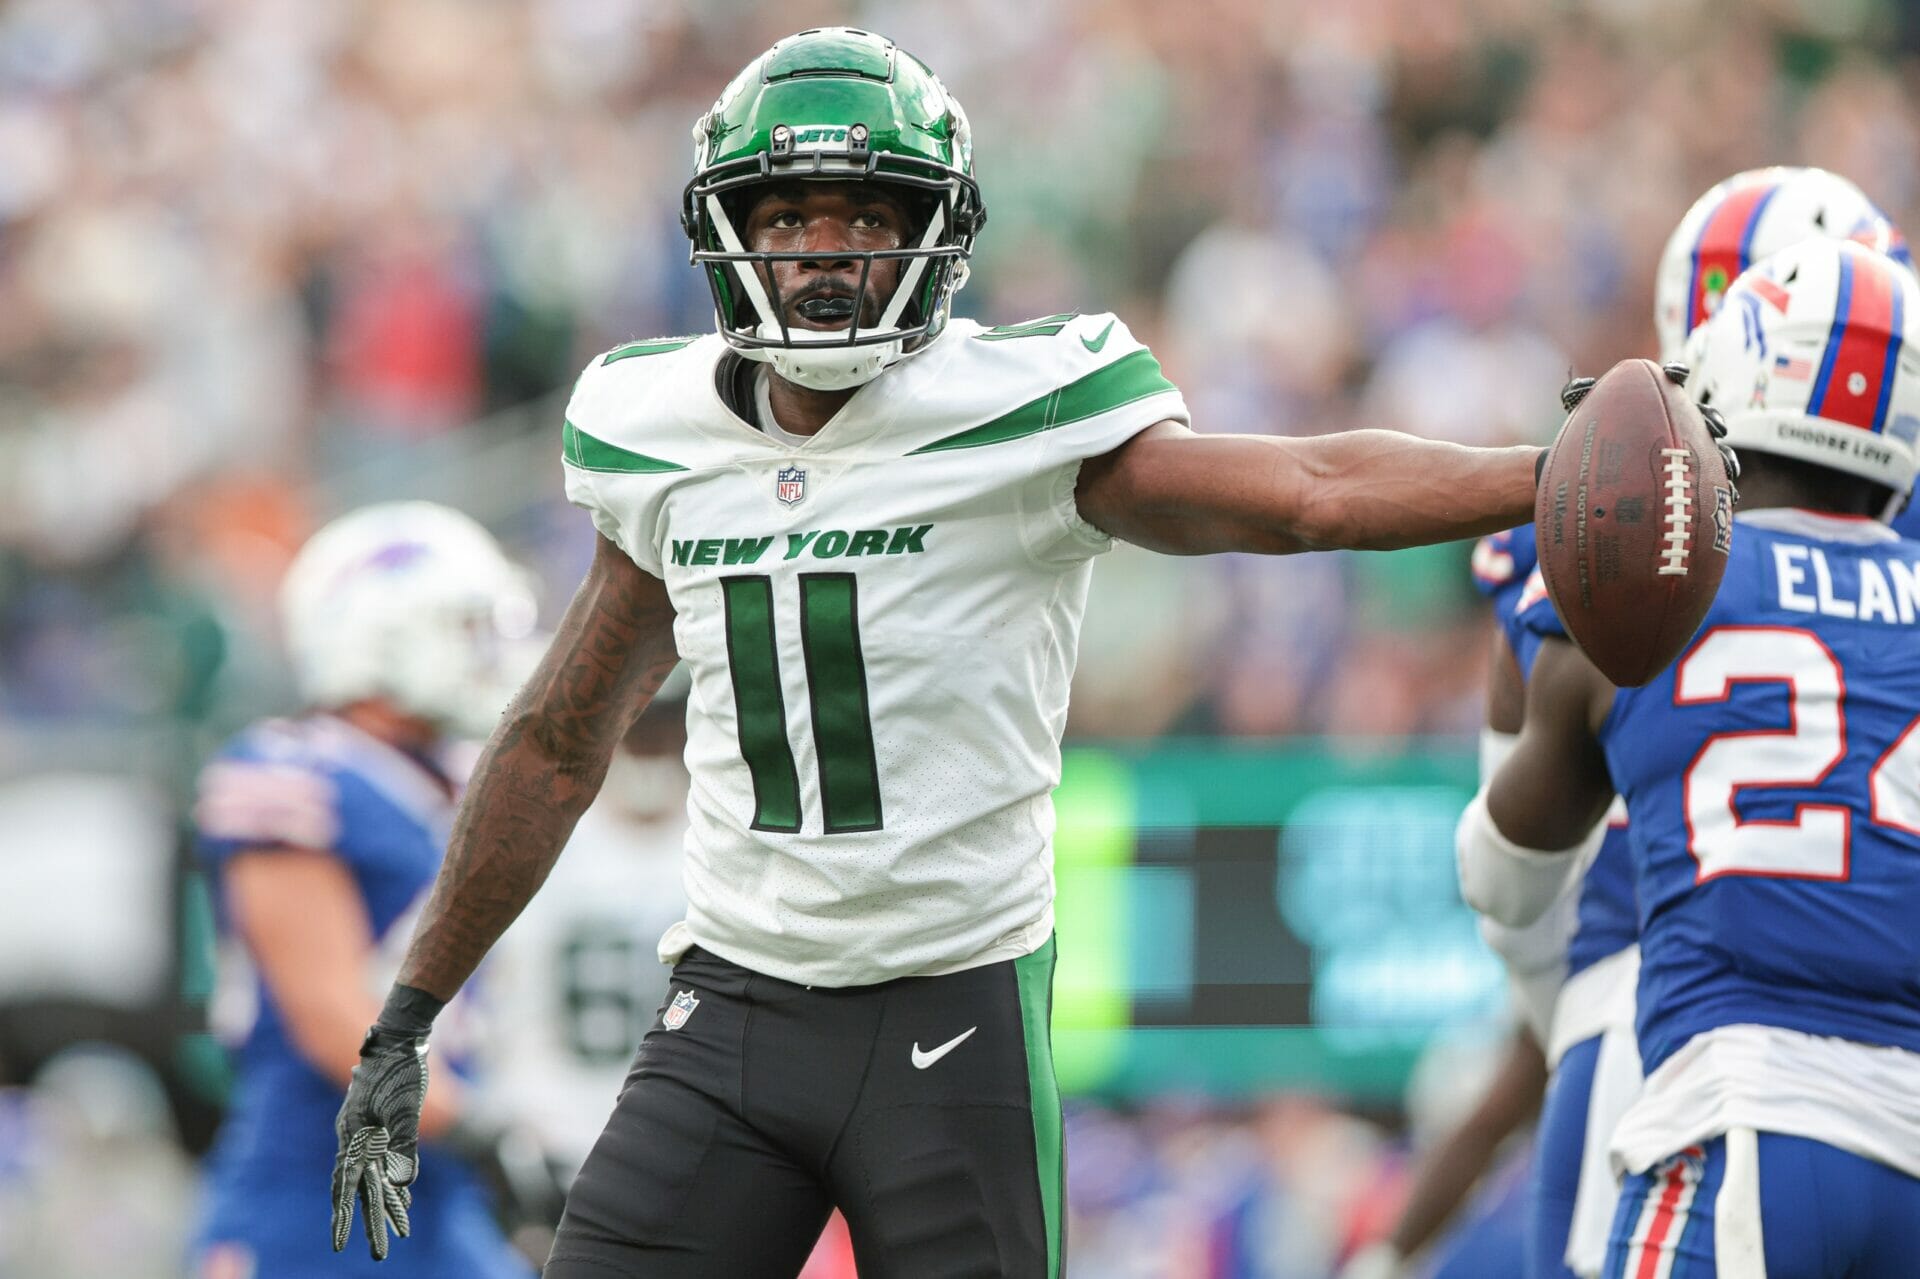 Nov 6, 2022; East Rutherford, New Jersey, USA; New York Jets wide receiver Denzel Mims (11) reacts after making a catch during the fourth quarter against the Buffalo Bills at MetLife Stadium. Mandatory Credit: Vincent Carchietta-USA TODAY Sports (NFL)